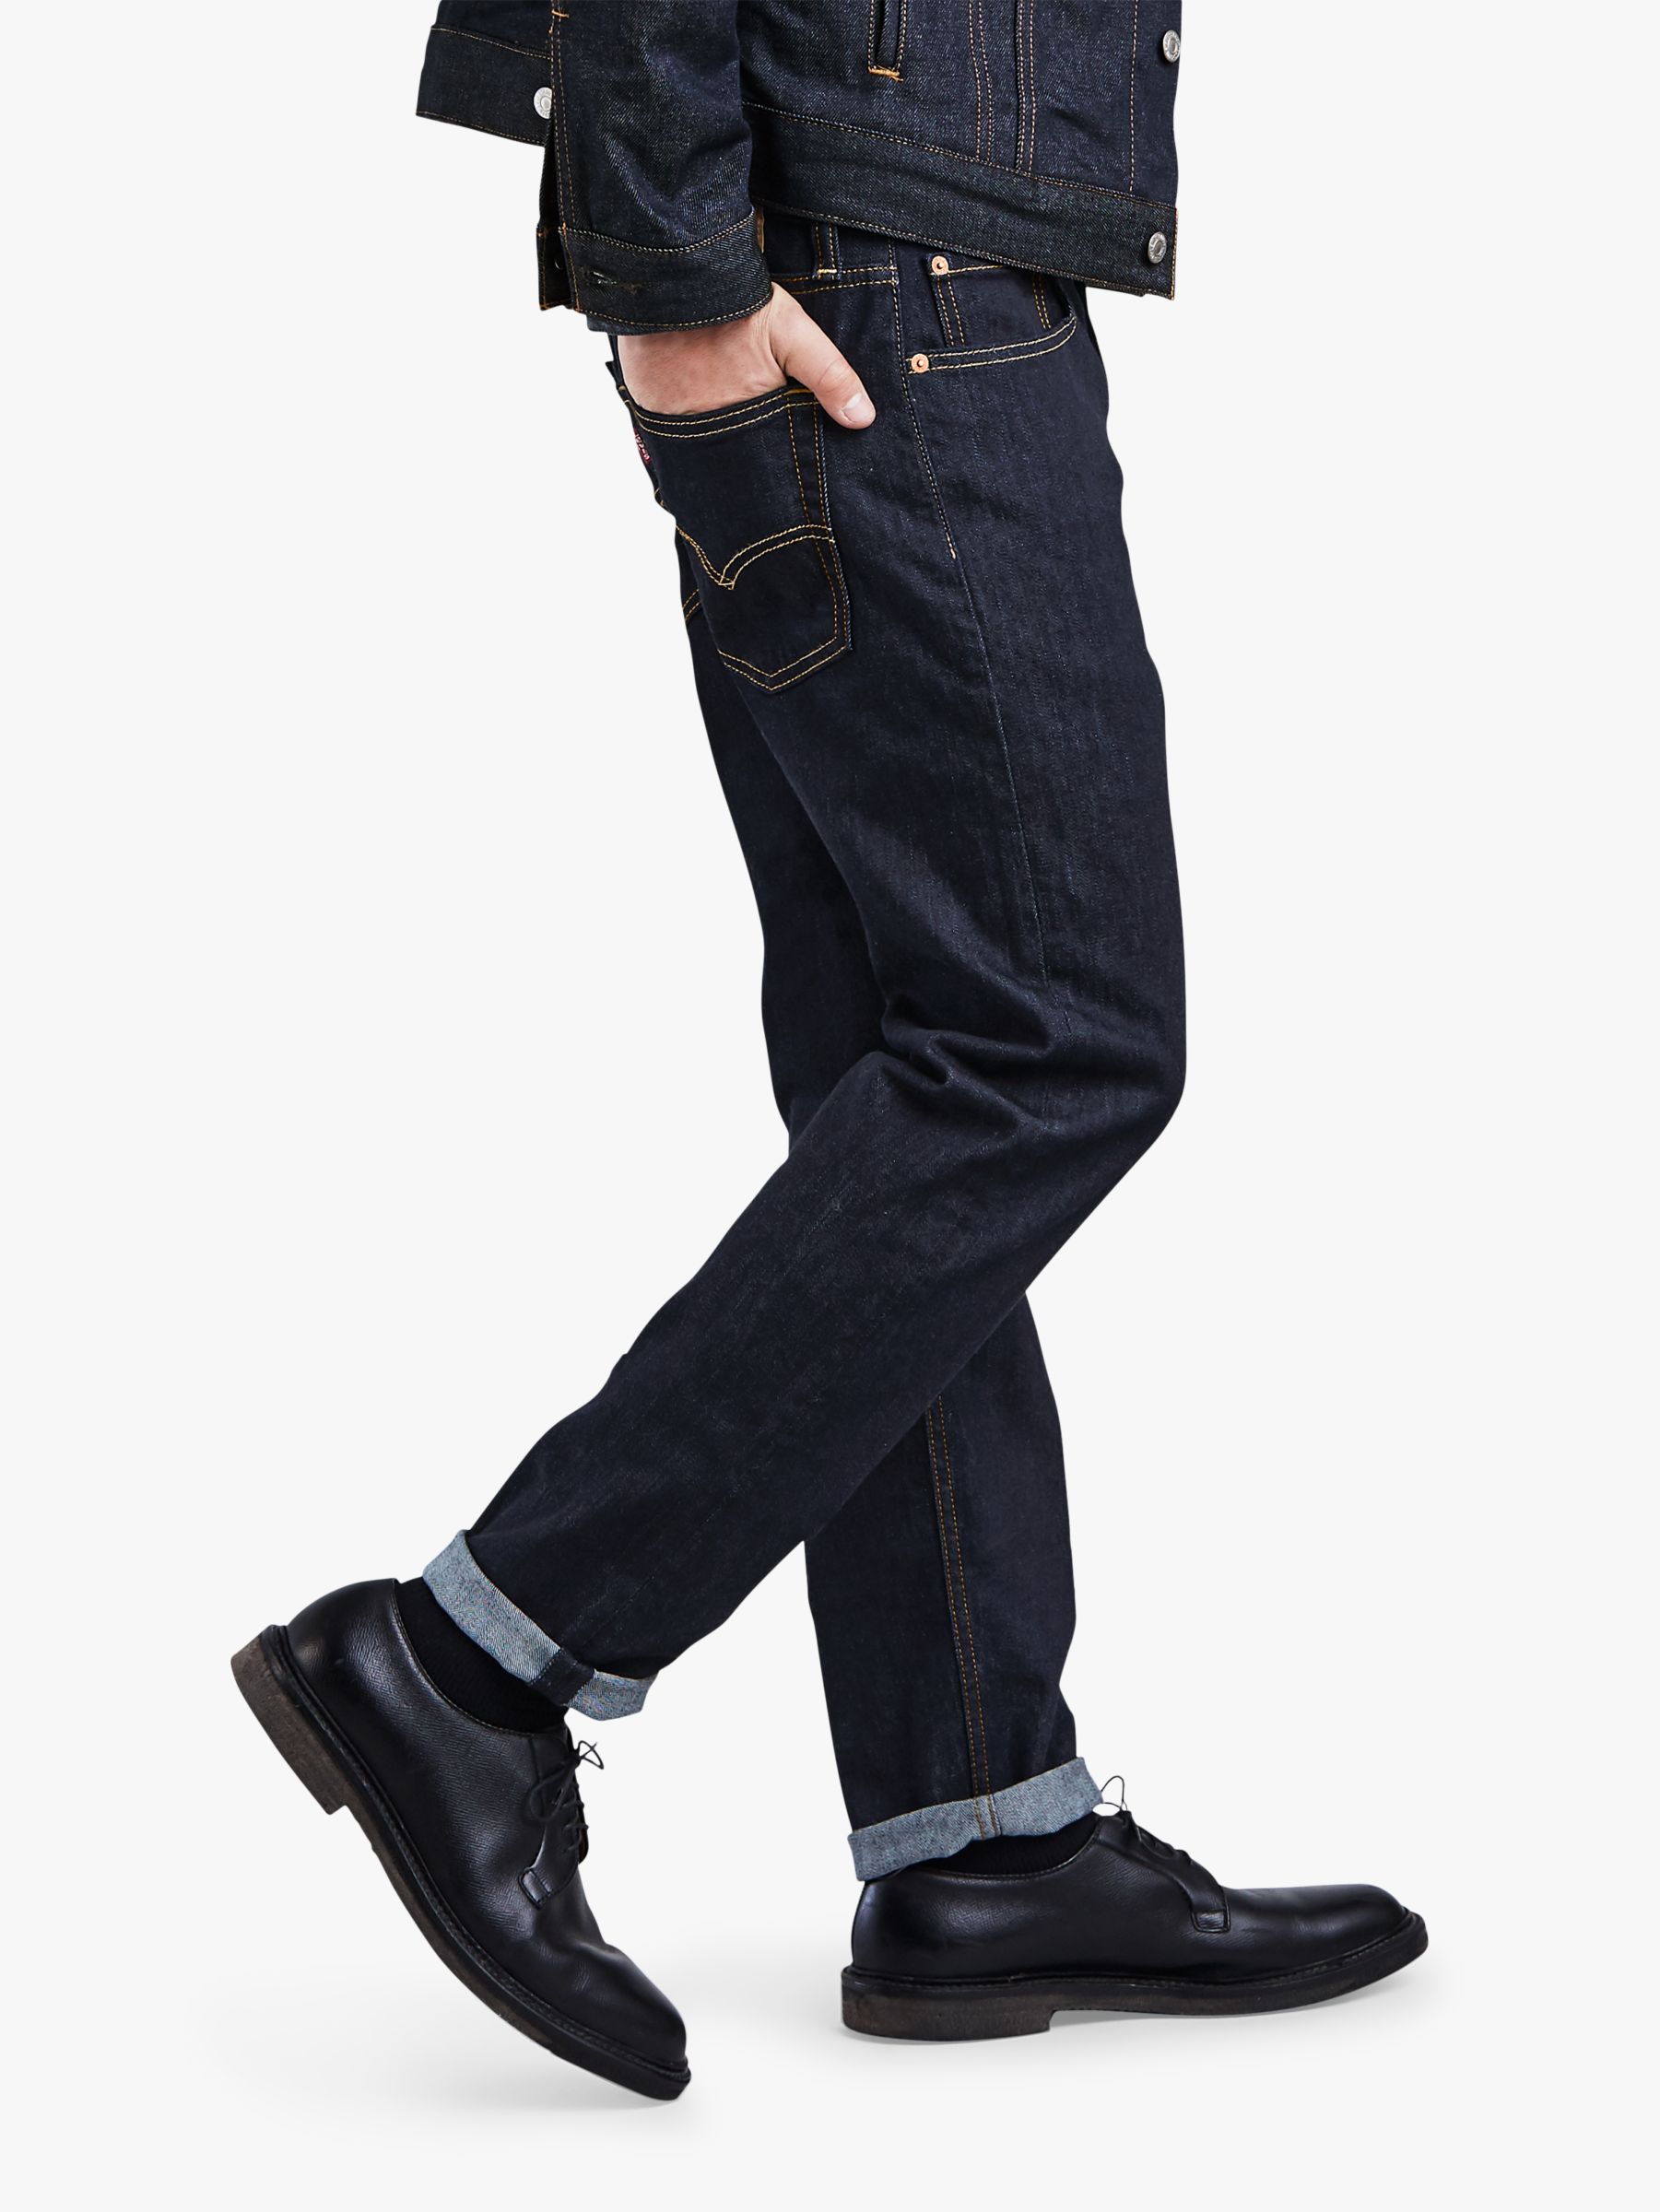 Levi's 502 Regular Tapered Jeans, Rock Cod at John Lewis & Partners